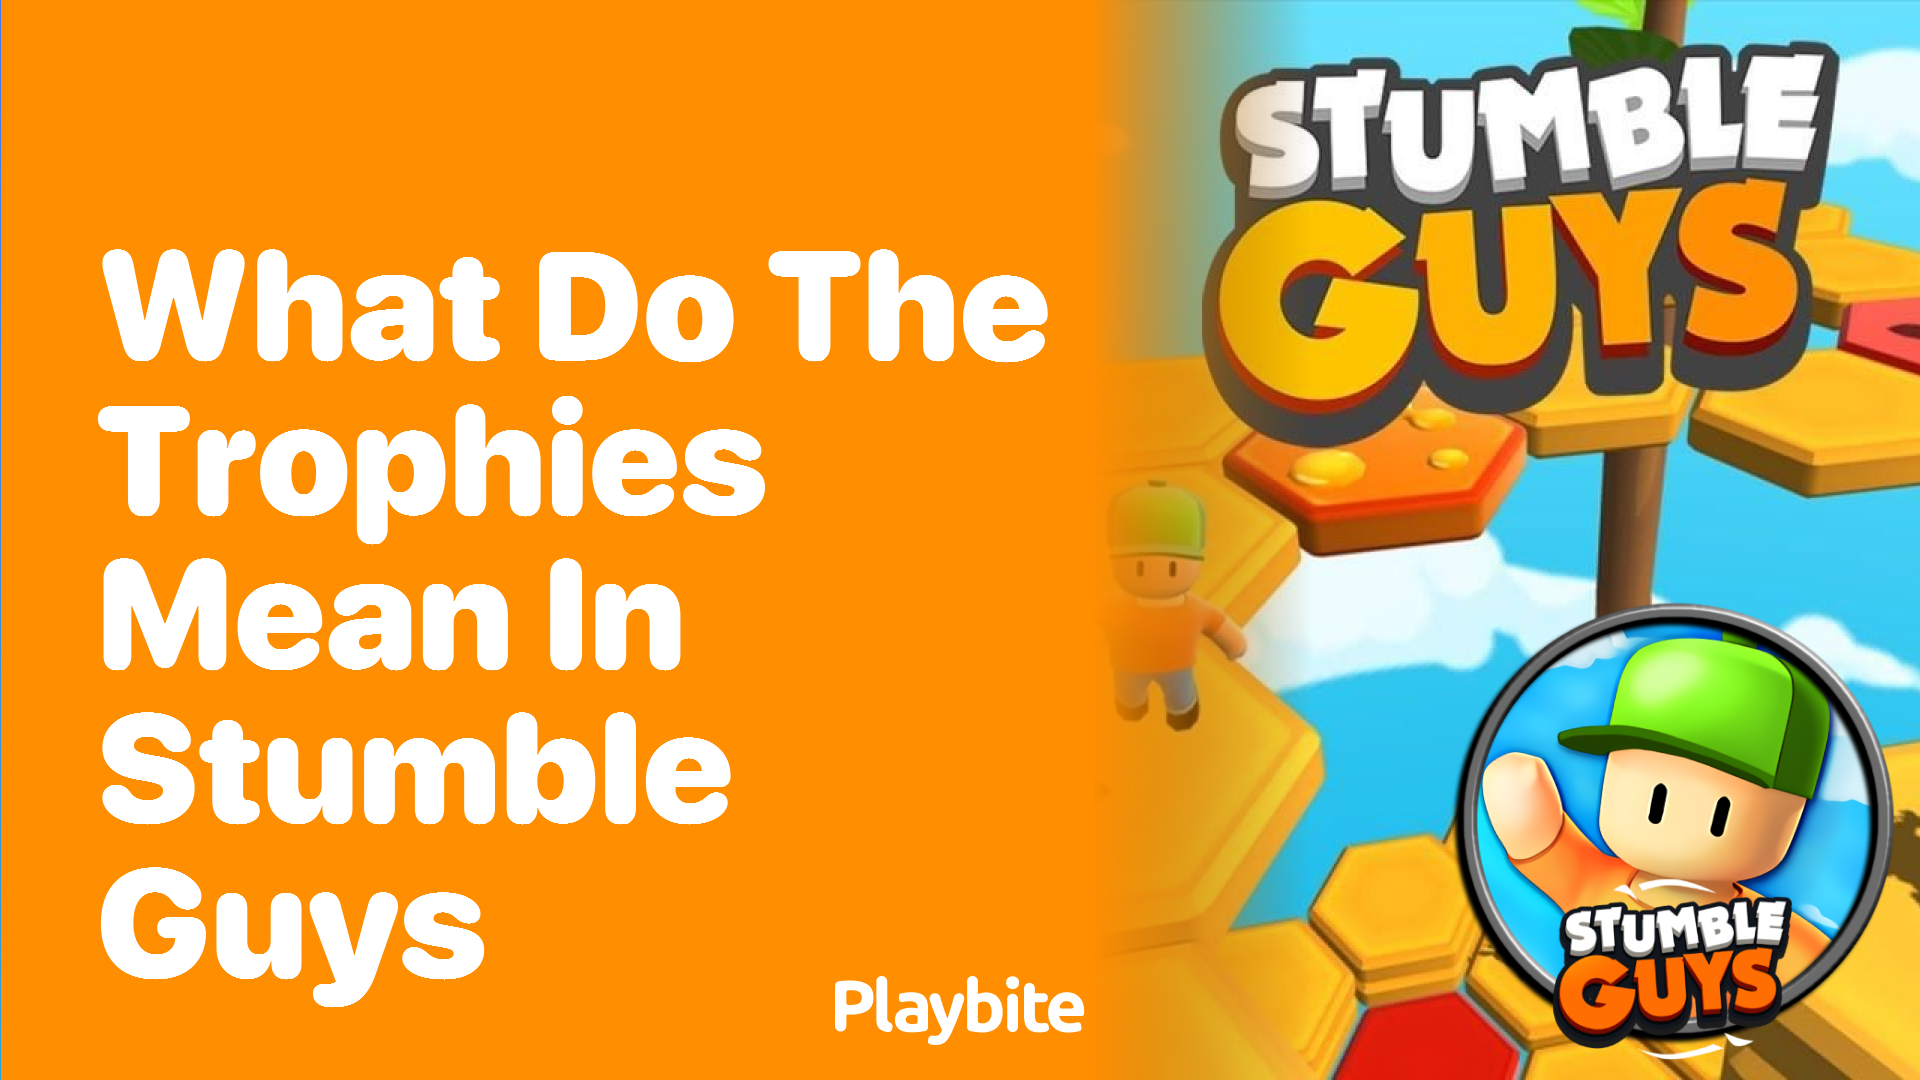 What Do the Trophies Mean in Stumble Guys?